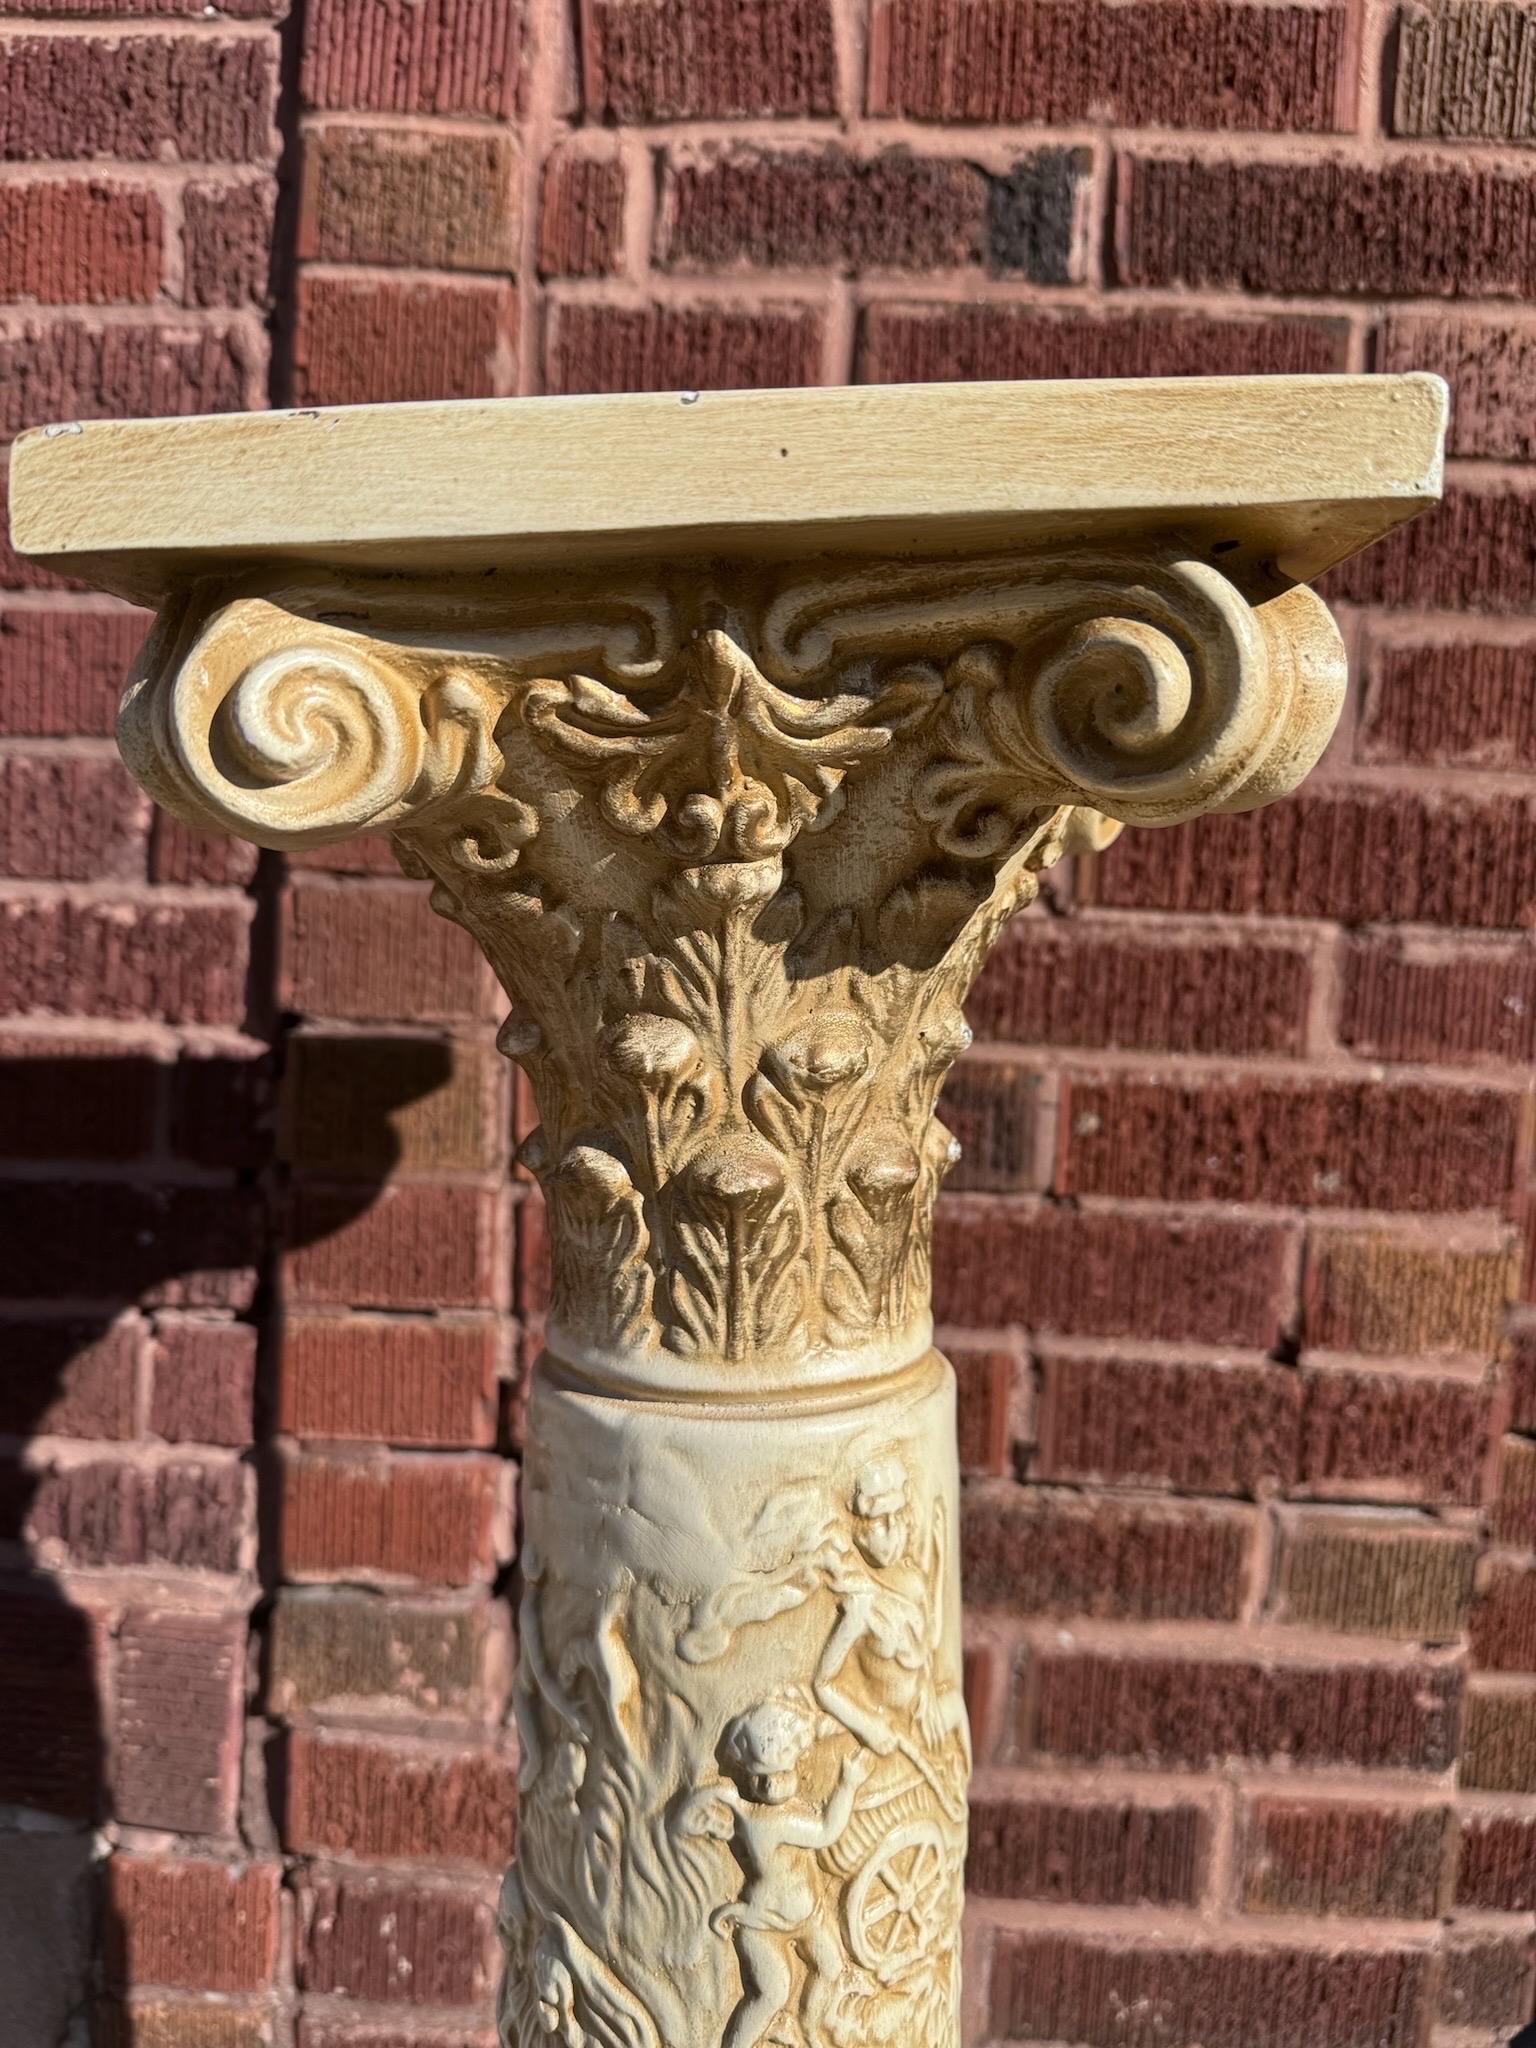 Vintage 20th Century Neoclassical Roman Style Column Stand/Pedestal

This ornate Italian pedestal has a beautiful acanthus leaf capital and a mythical scene carved on the column face. The pillar's figural scene contains many cherub putti and gods on